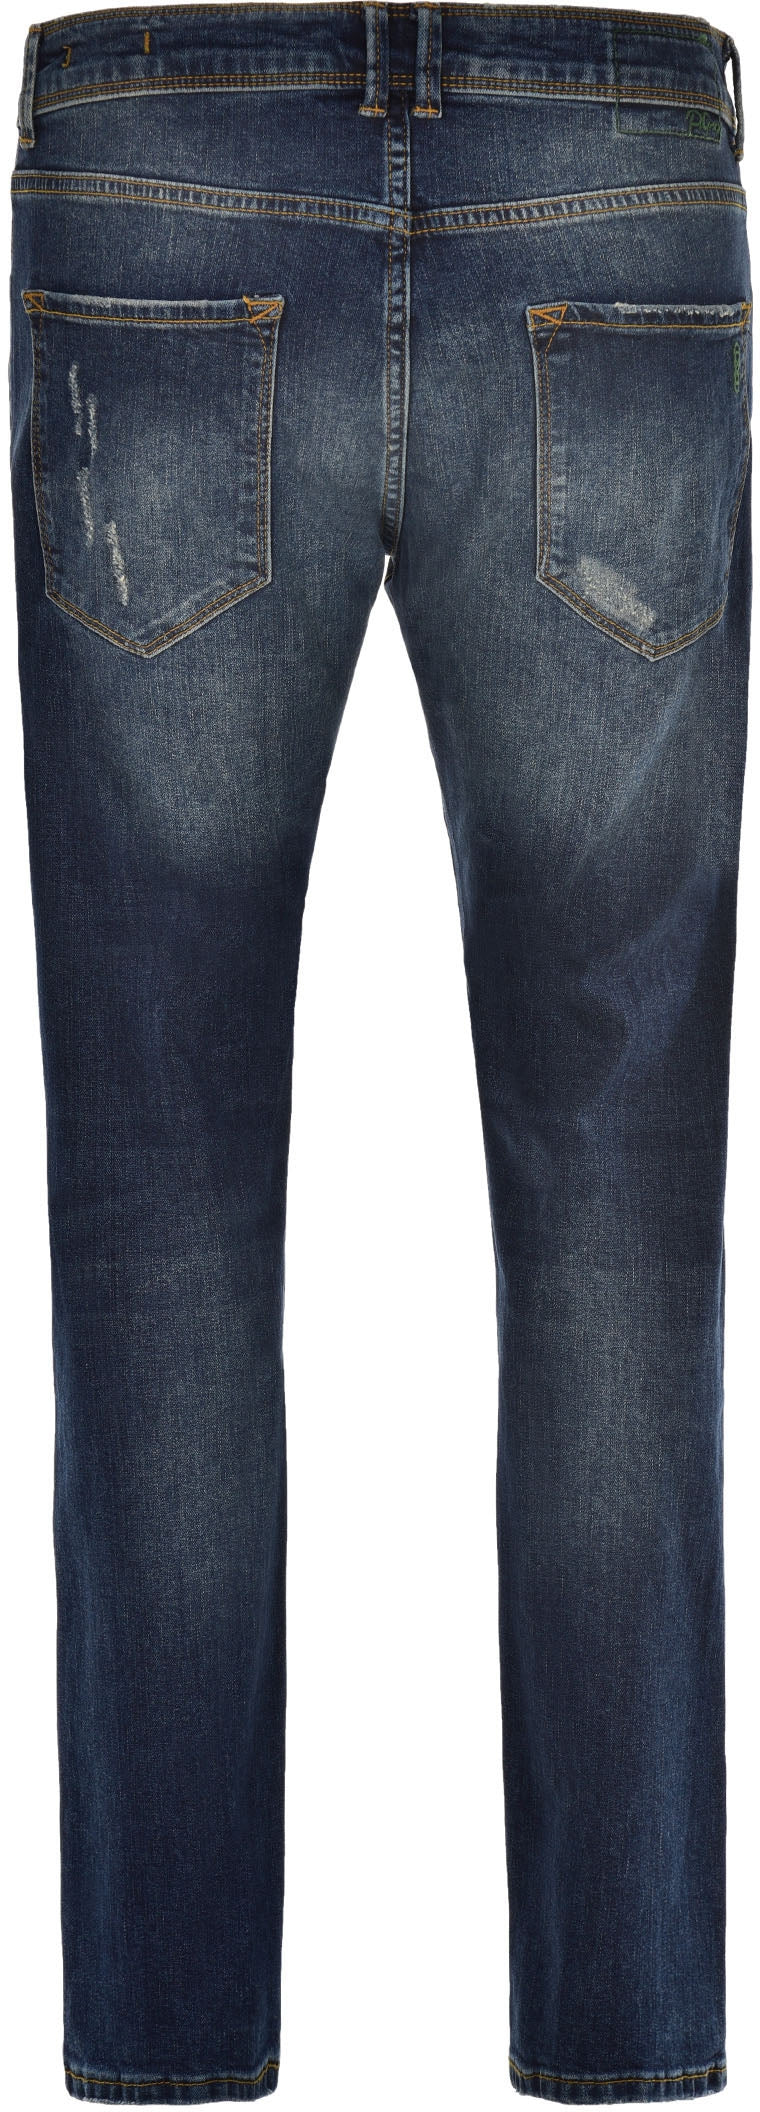  P.grax Jeans Tailor Tapared Fit Blue Uomo - 2